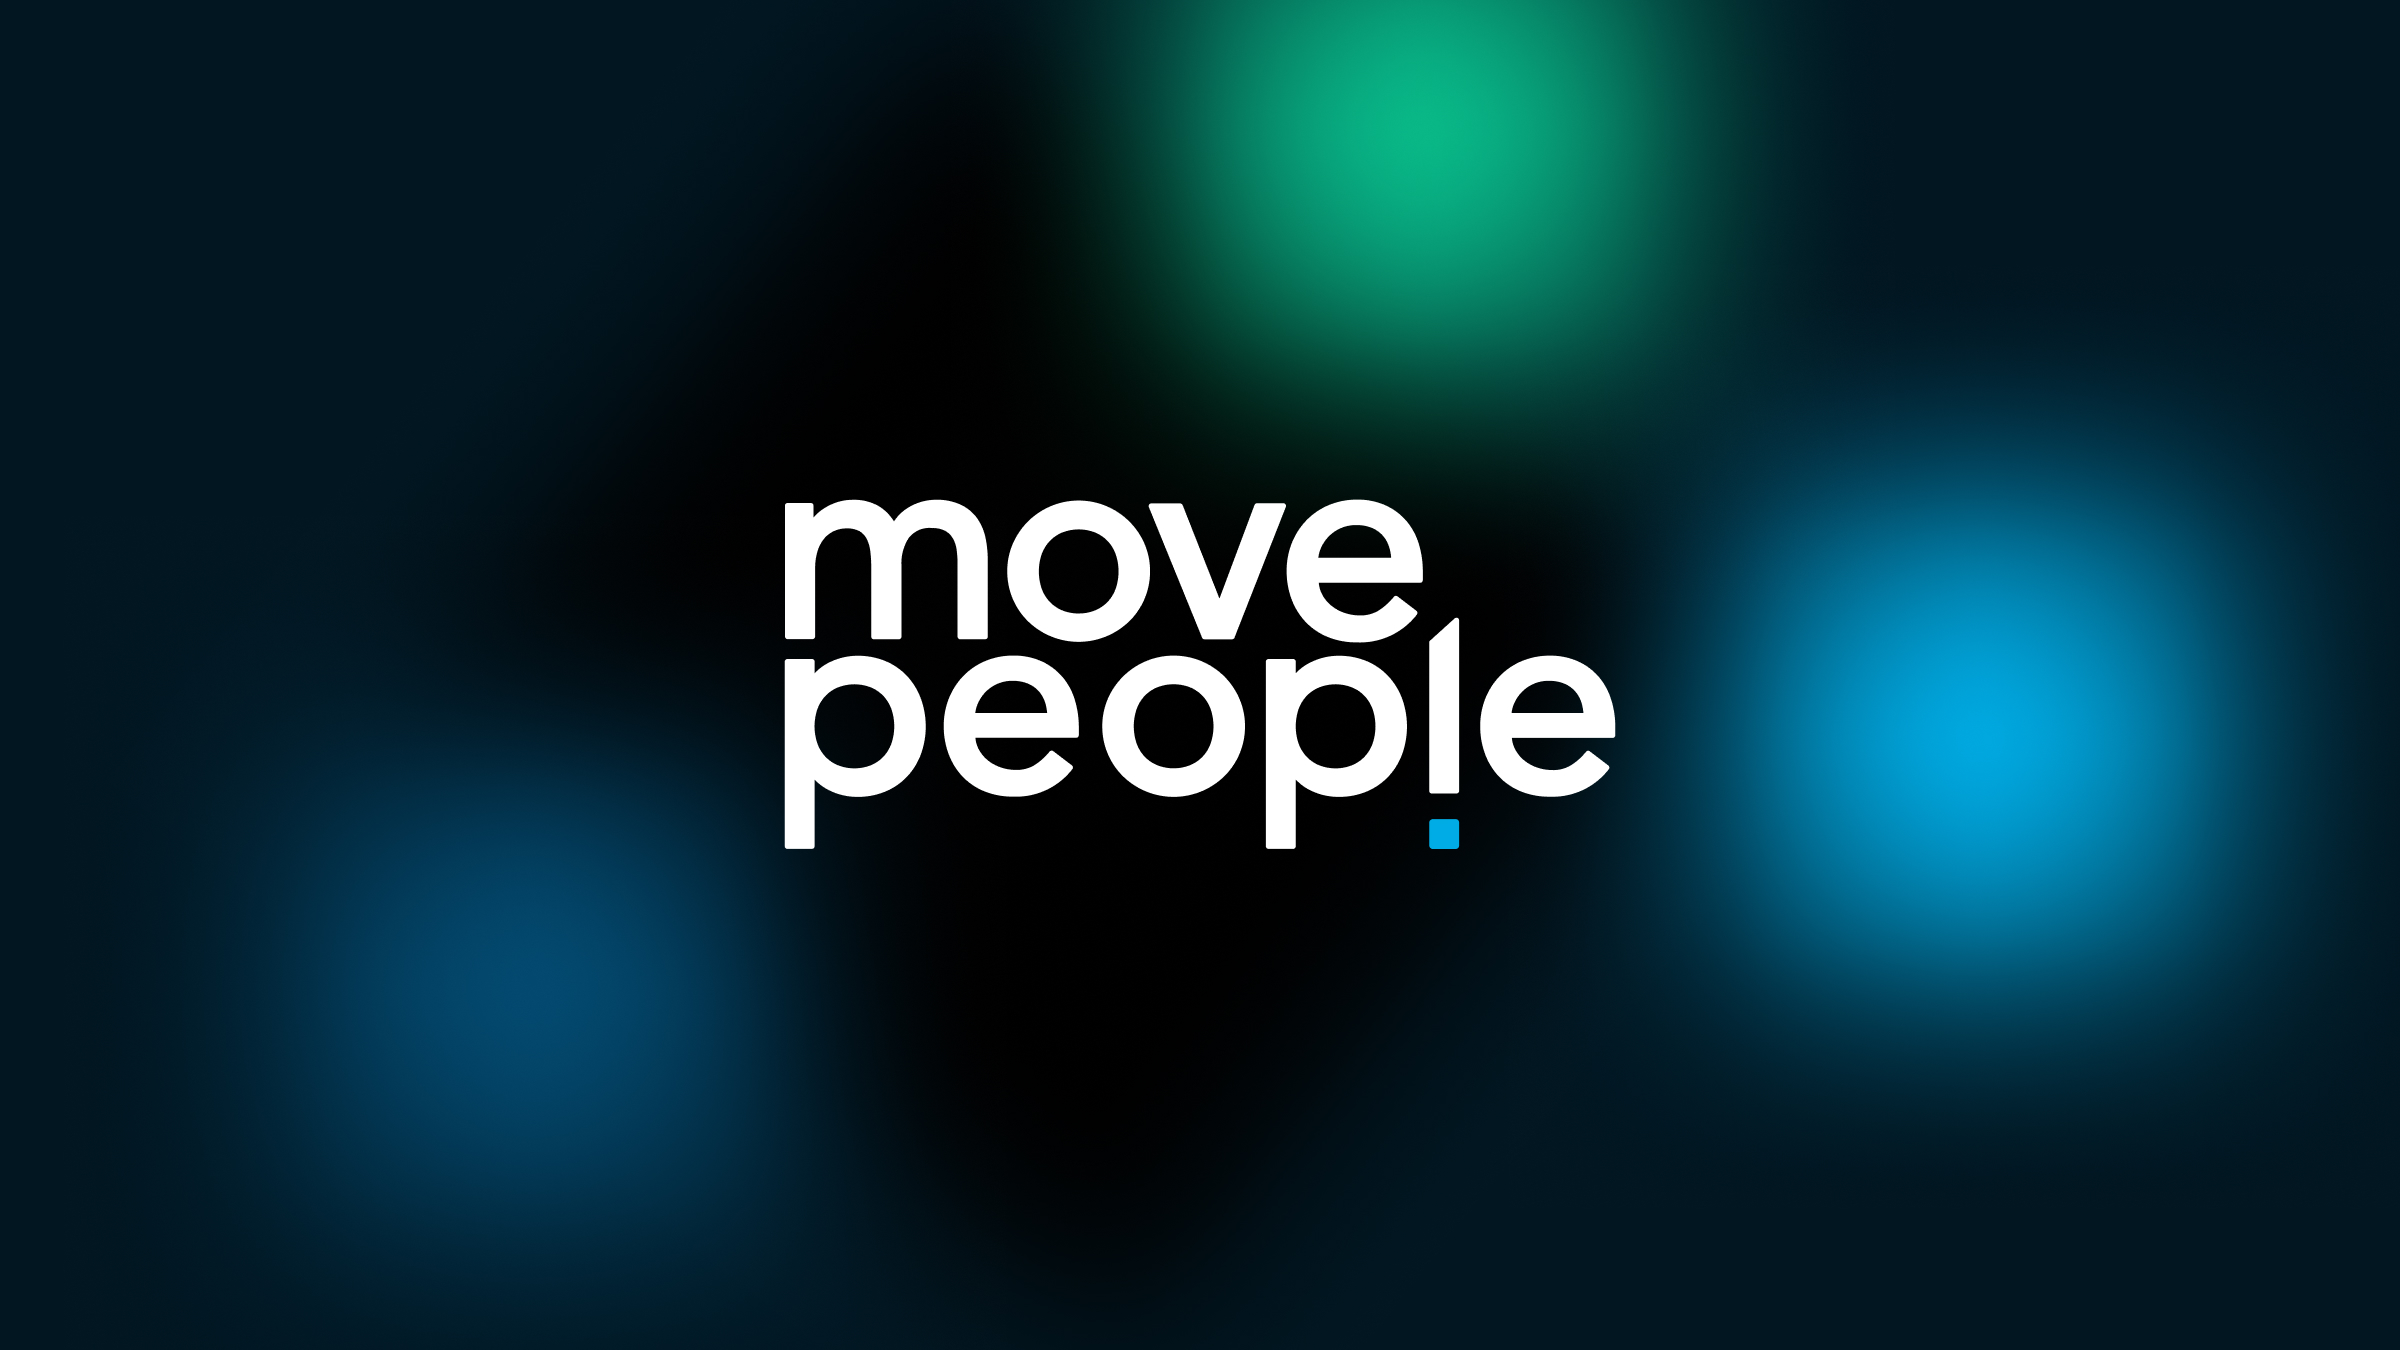 (c) Movepeople.ch